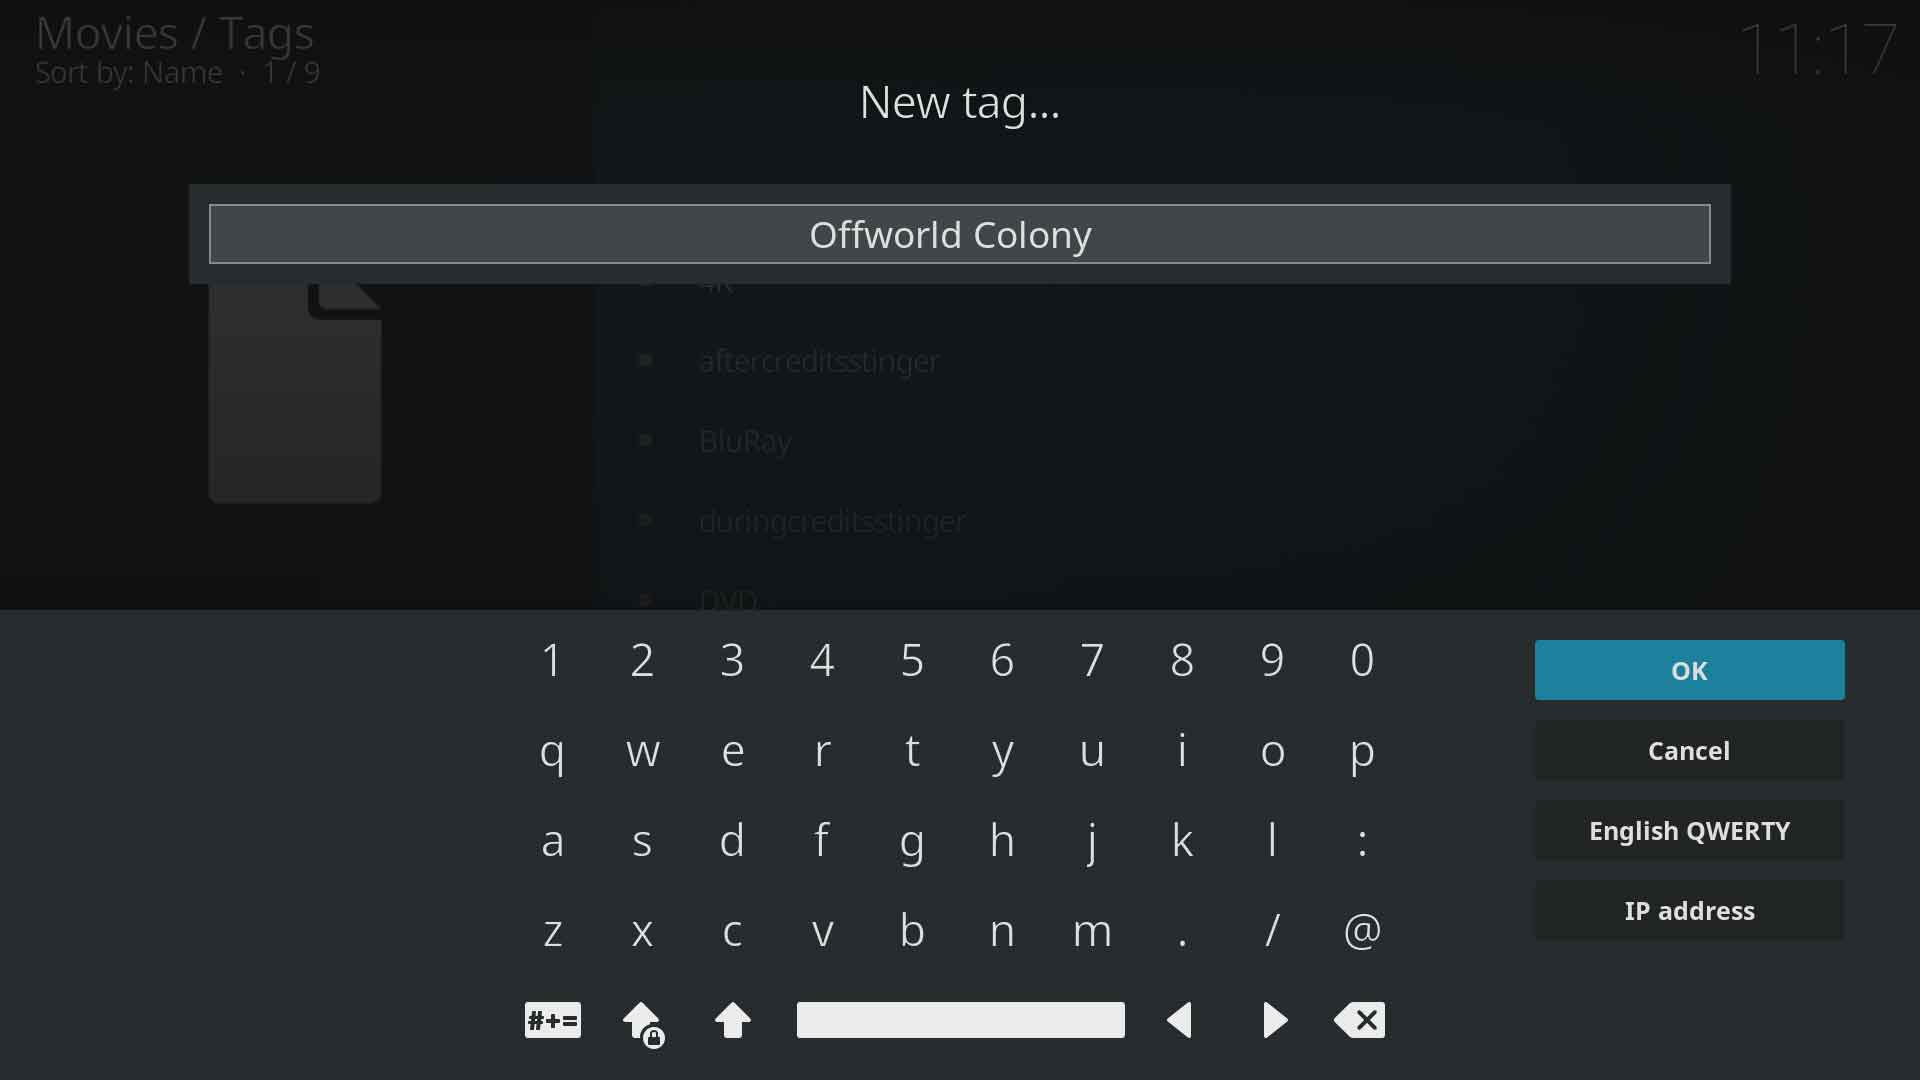 Image 4: Type in the name of your new tag and select OK